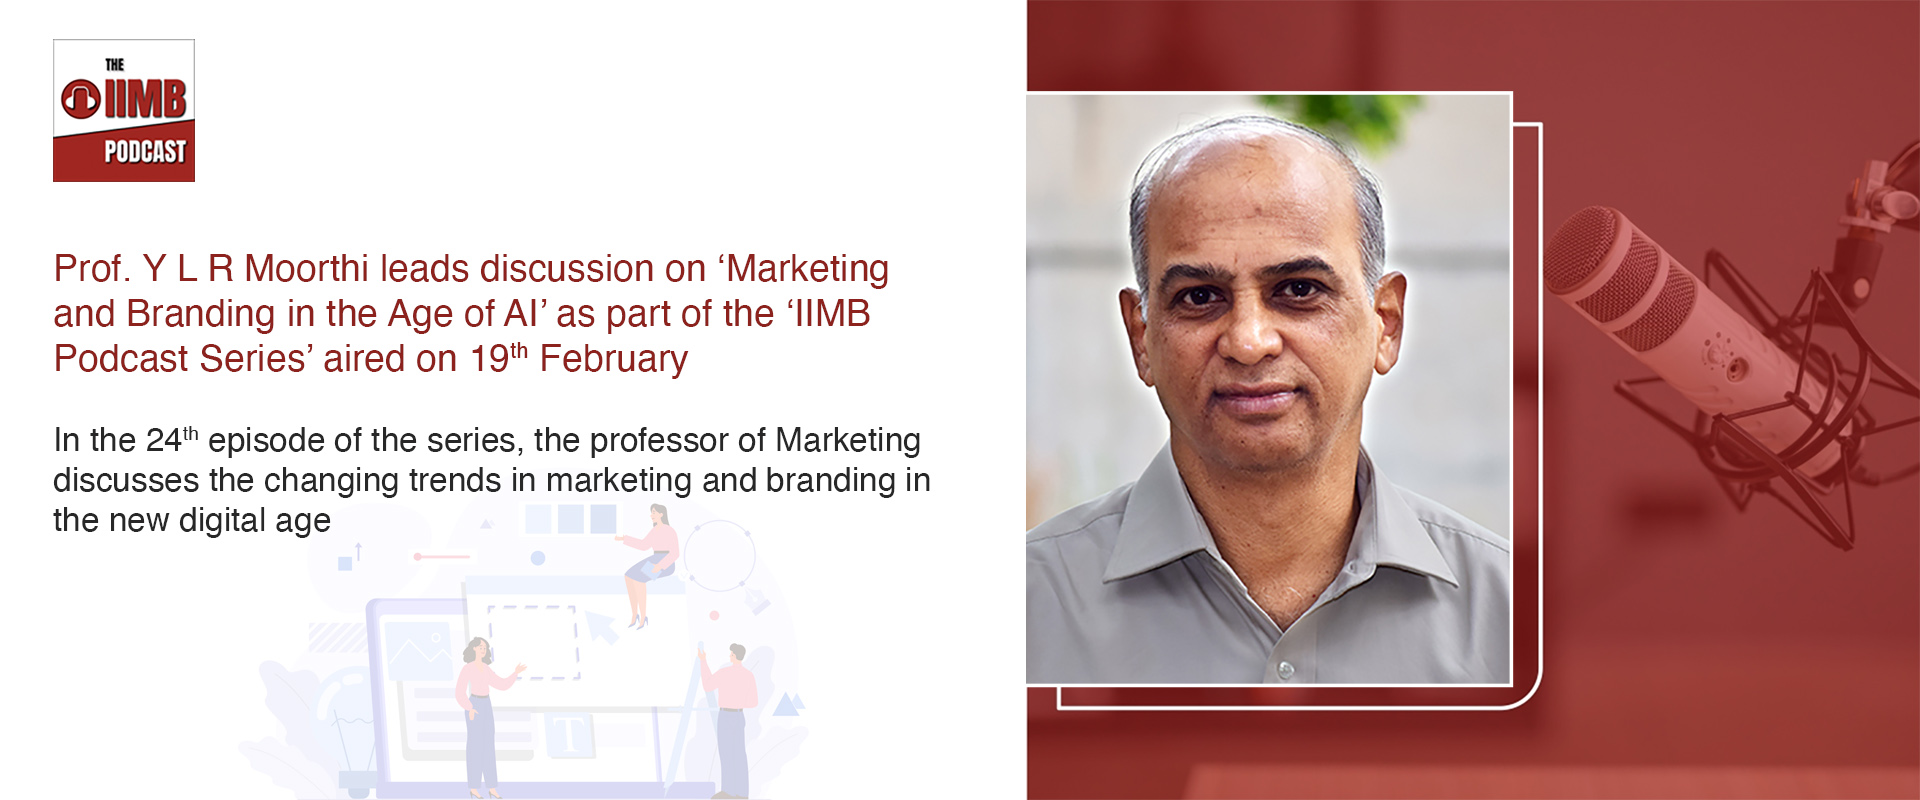  Prof. Y L R Moorthi leads discussion on ‘Marketing and Branding in the Age of AI’ as part of the ‘IIMB Podcast Series’ aired on 19th February 